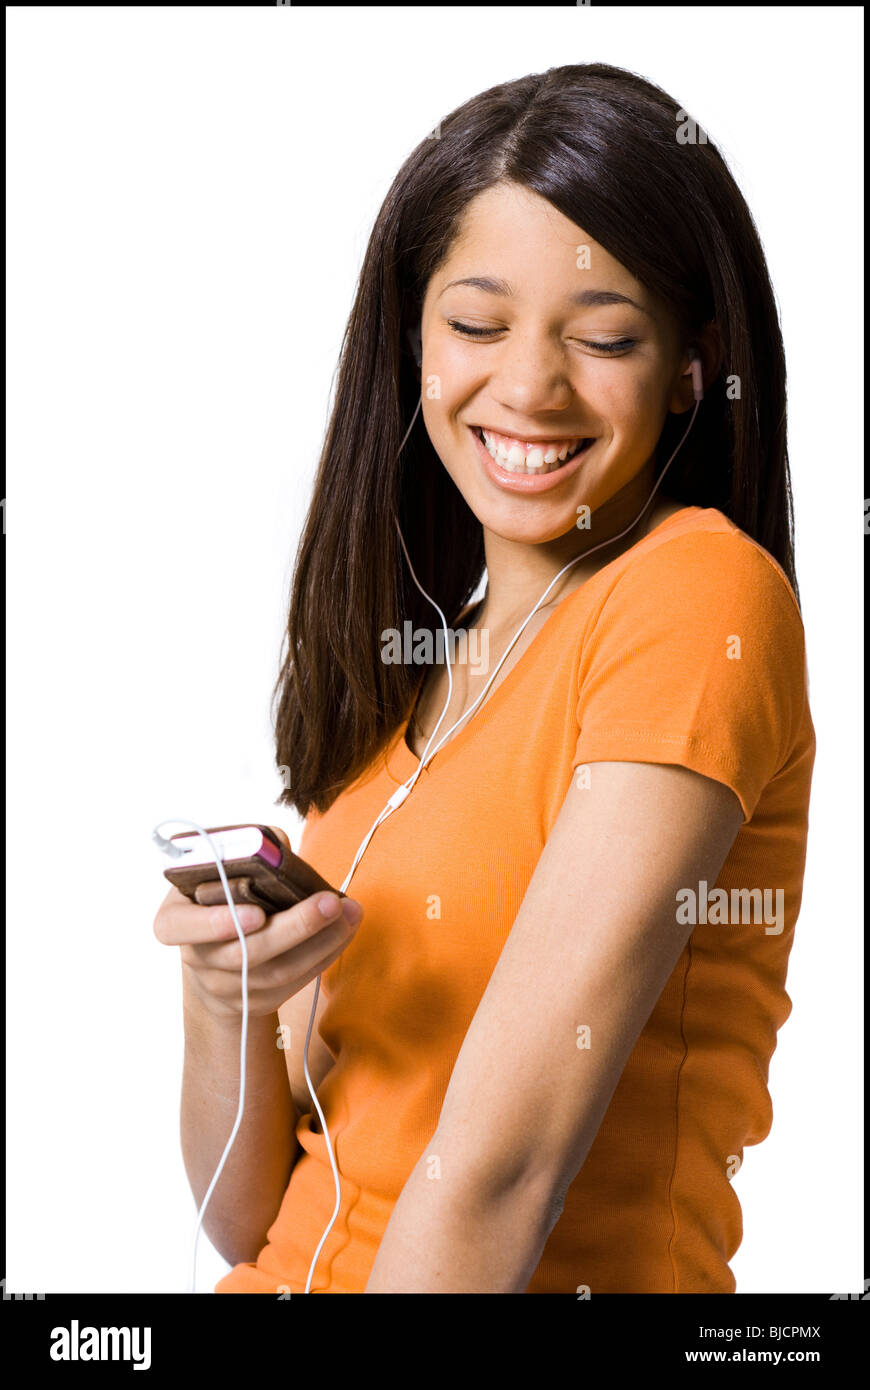 Girl listening to mp3 player Stock Photo